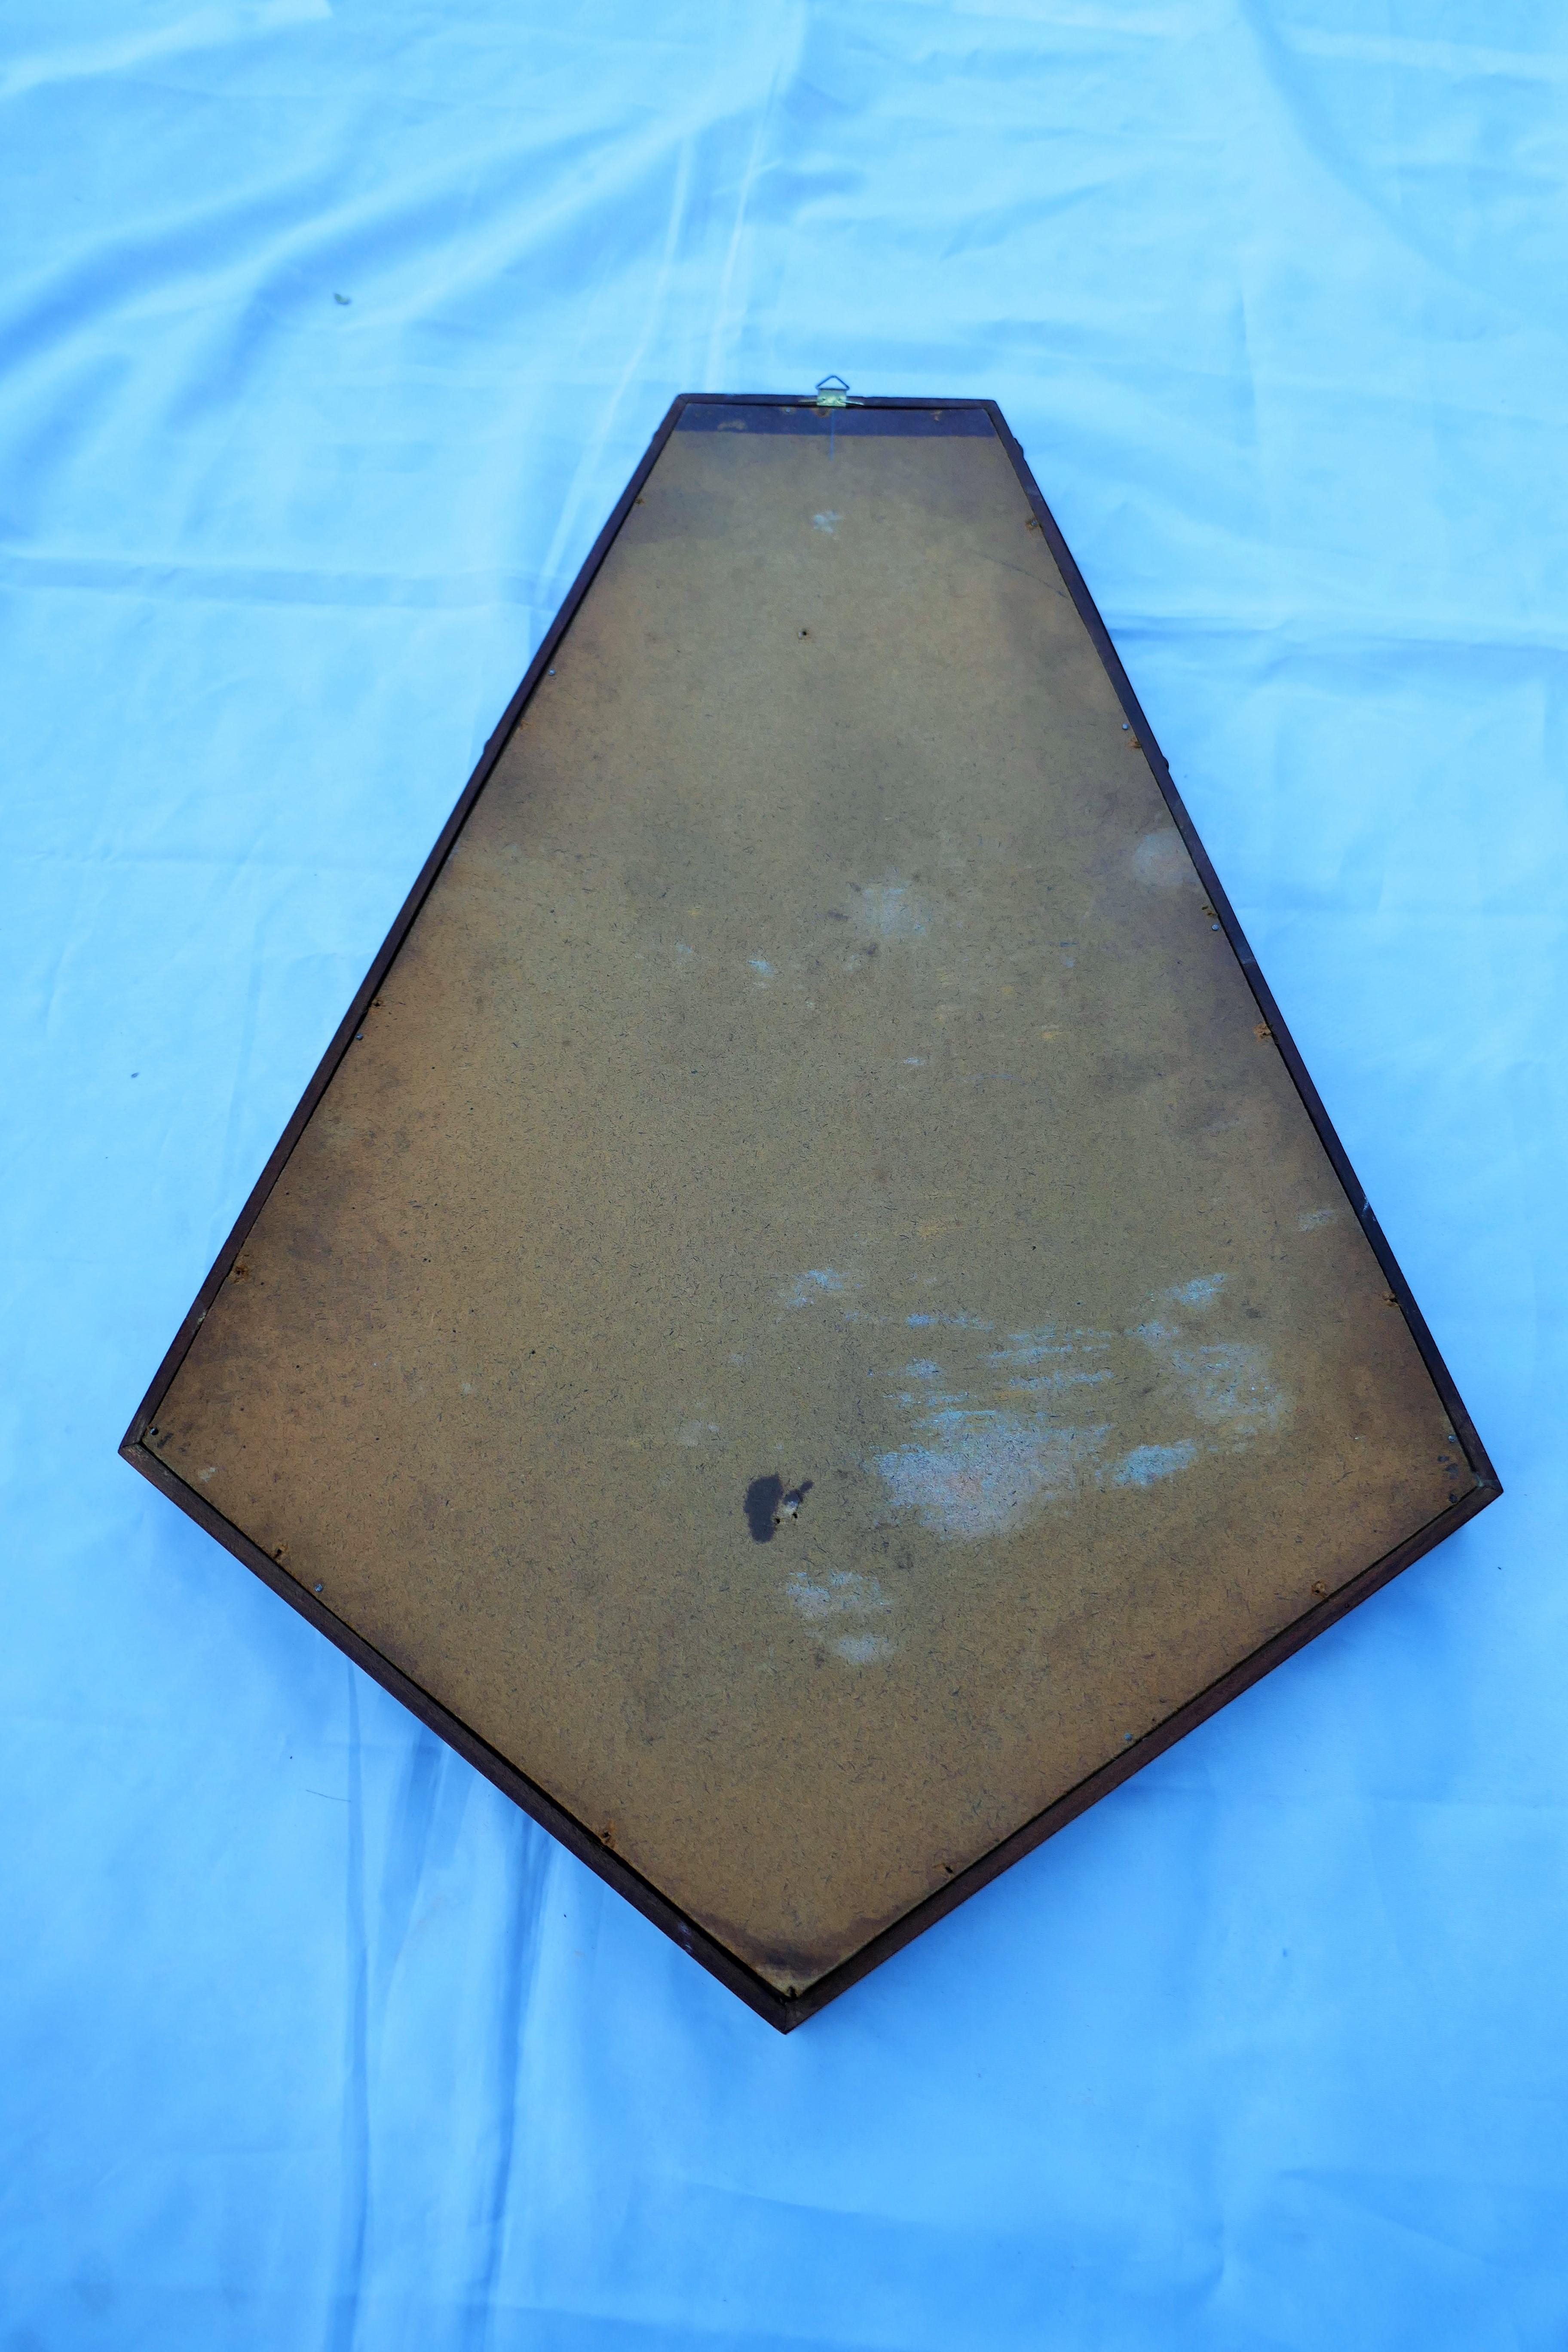 Pentagonal mirror 
The leather stand for hanging the mirror is broken as pictured.
Good Condition
Thank you